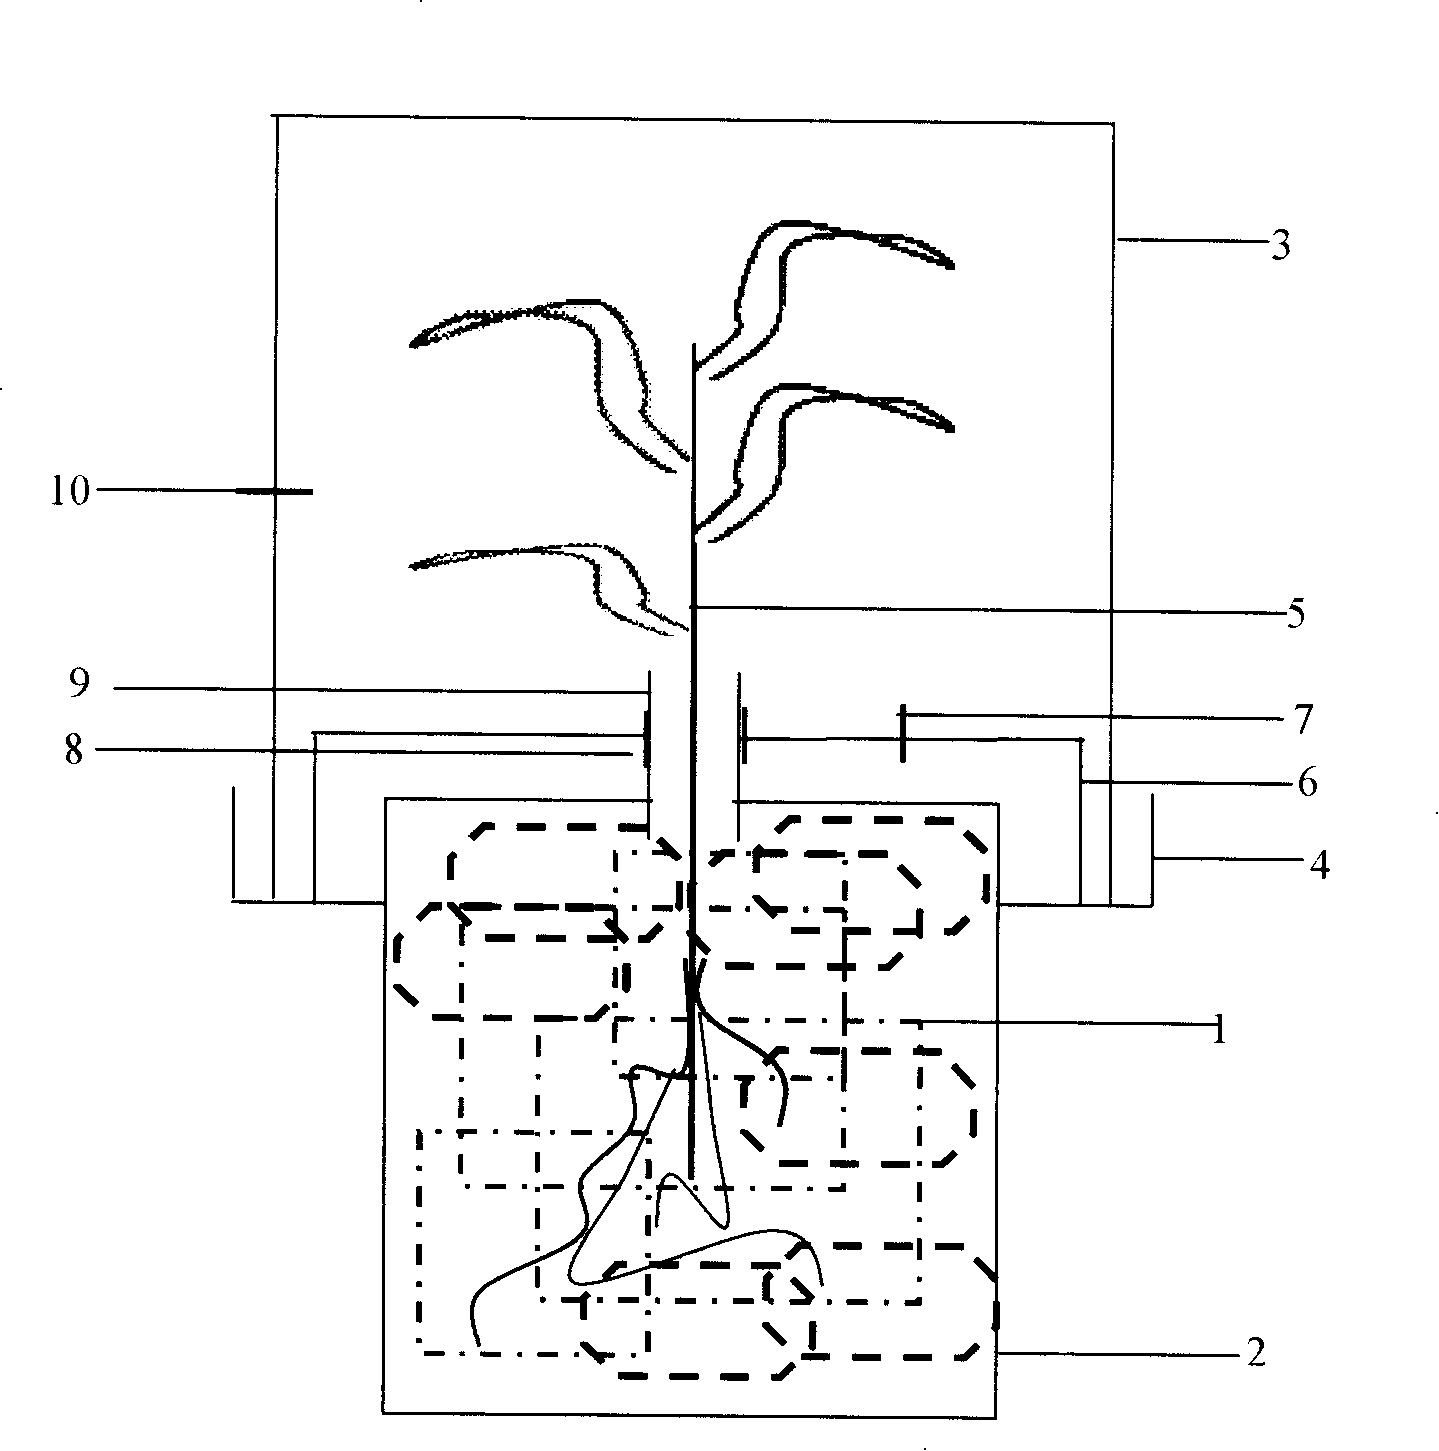 Analog system device for detecting crop rhizosphere respiration and making plant